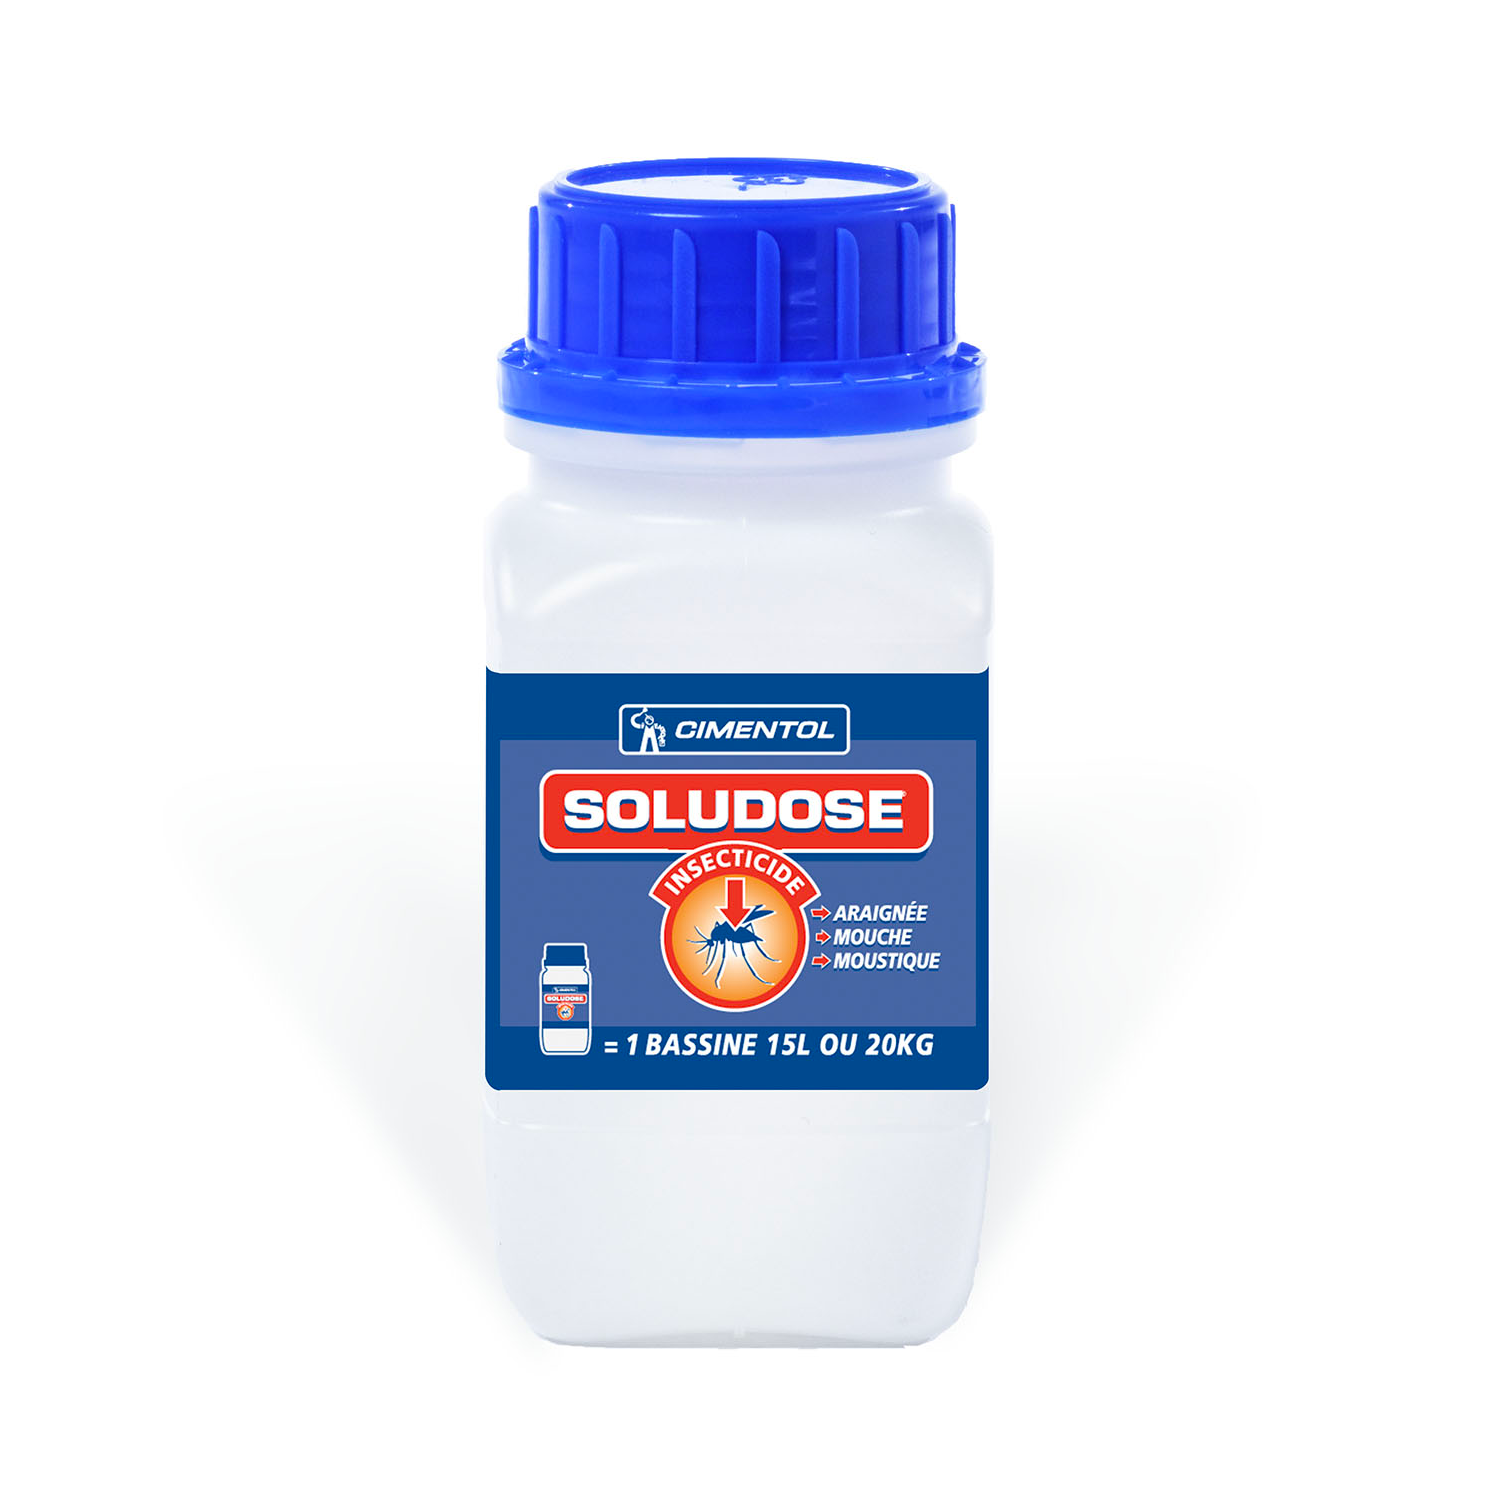 SOLUDOSE INSECTICIDE - Cimentol